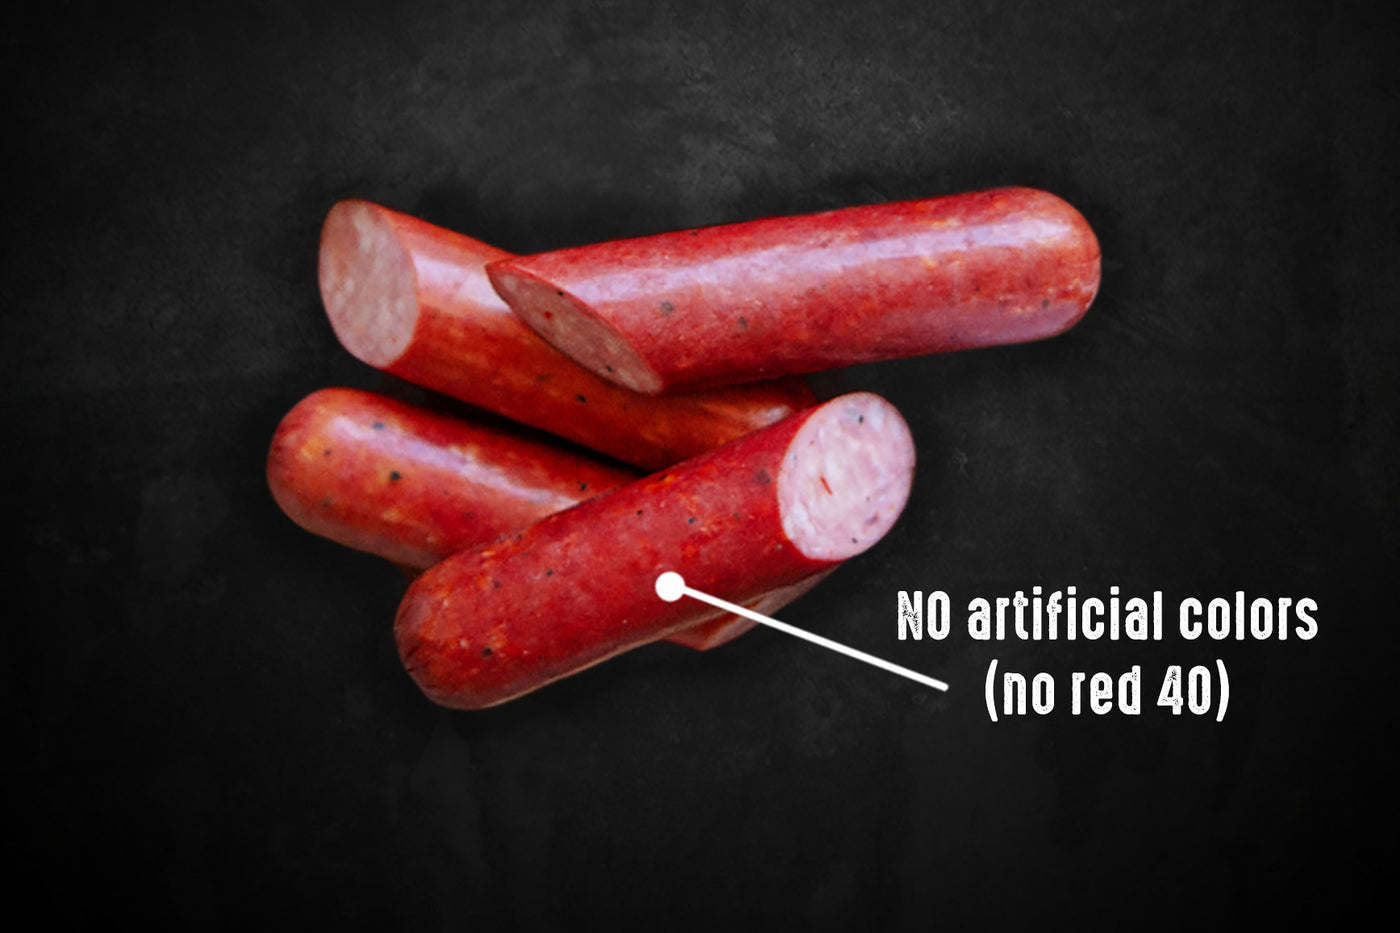 Pederson's Mild Pickled Sausage is shown against a black background. The words No Red 40 appear beside it.